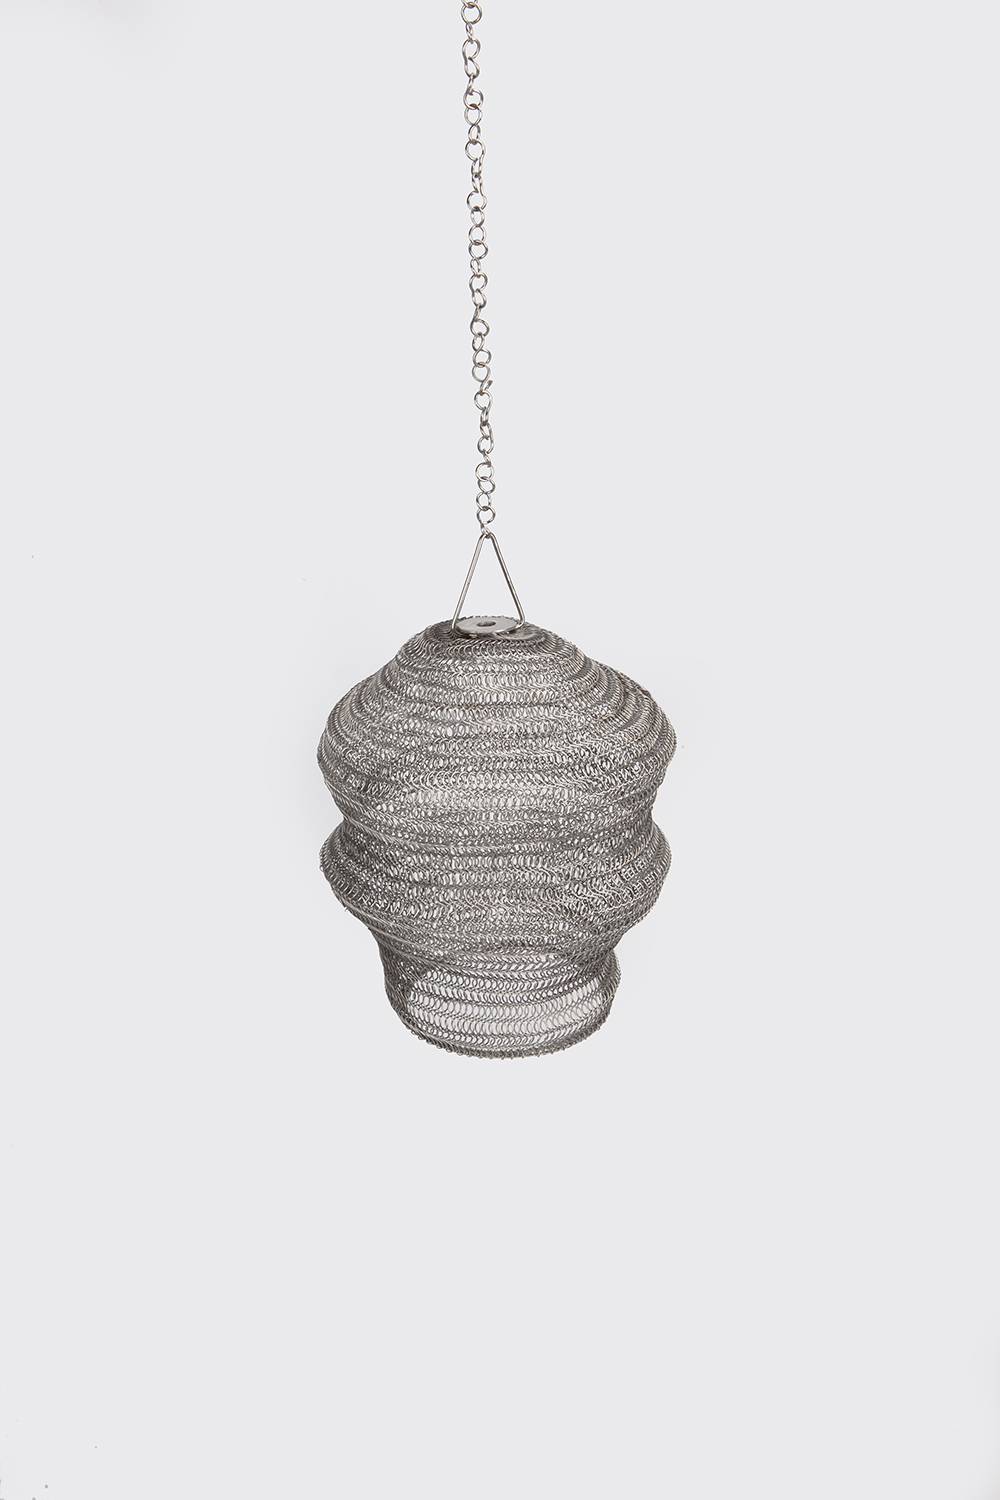 knitted wire lamp shade - small